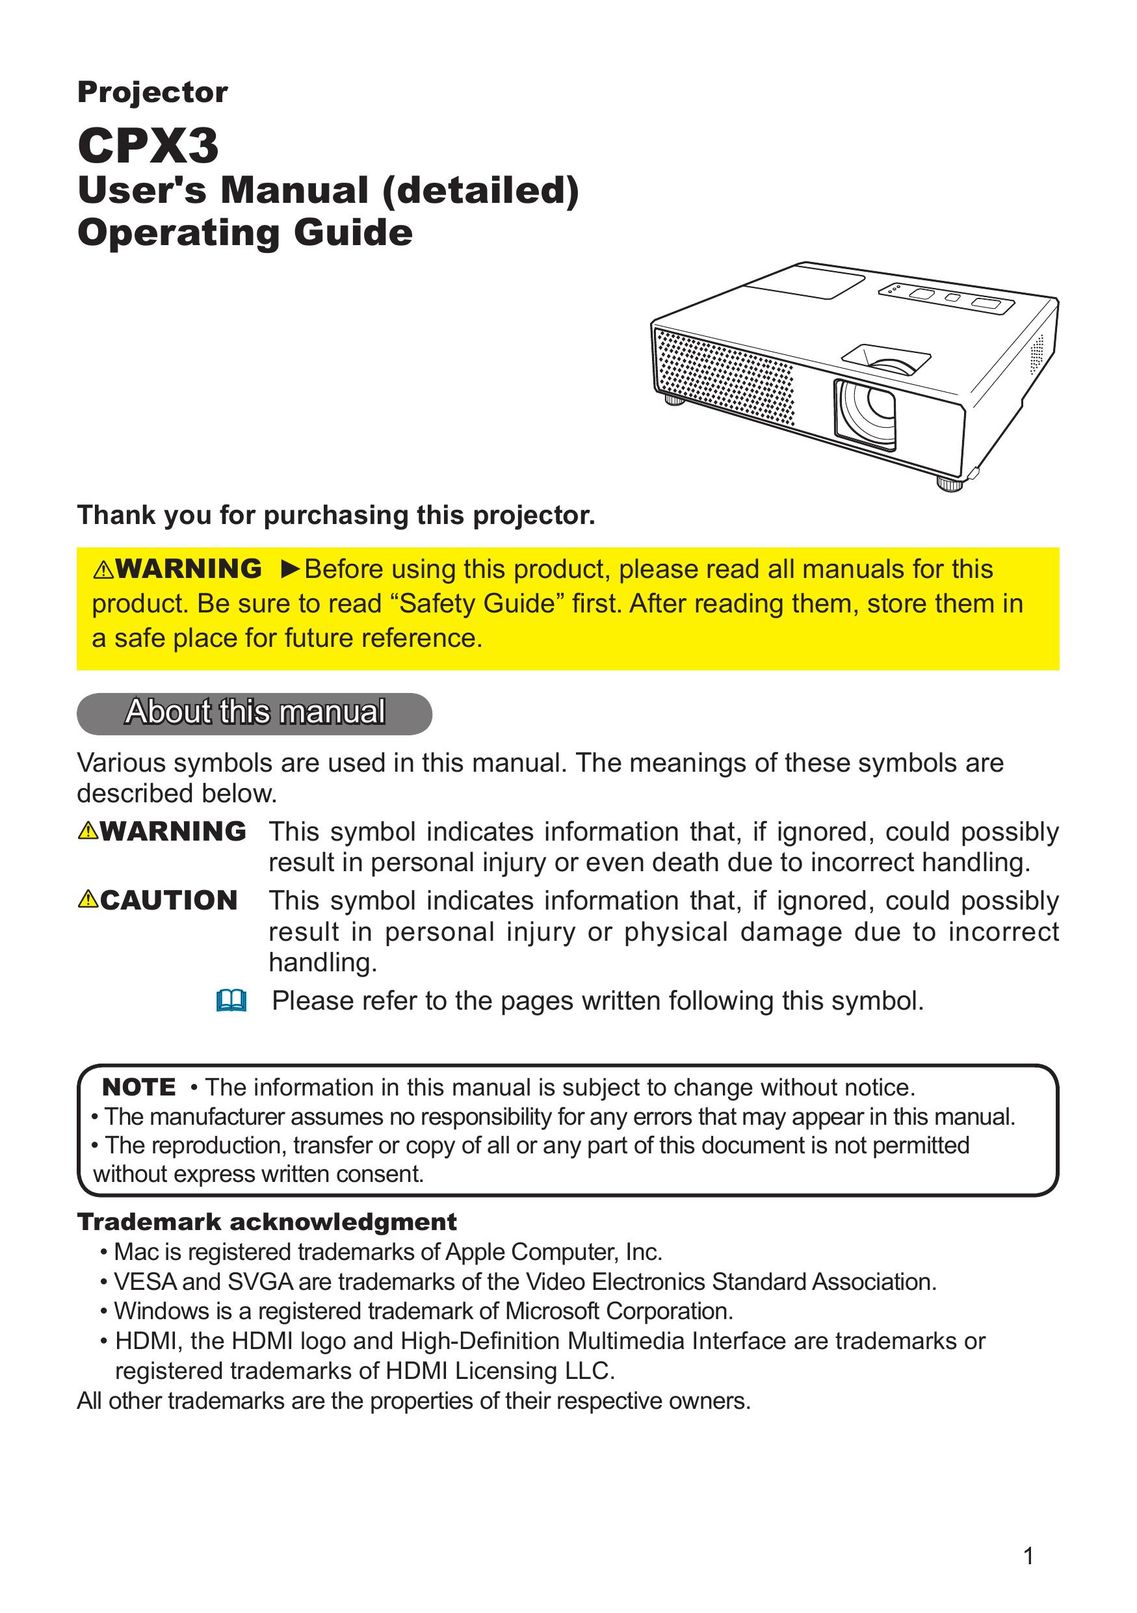 Apple CPX3 Projector User Manual